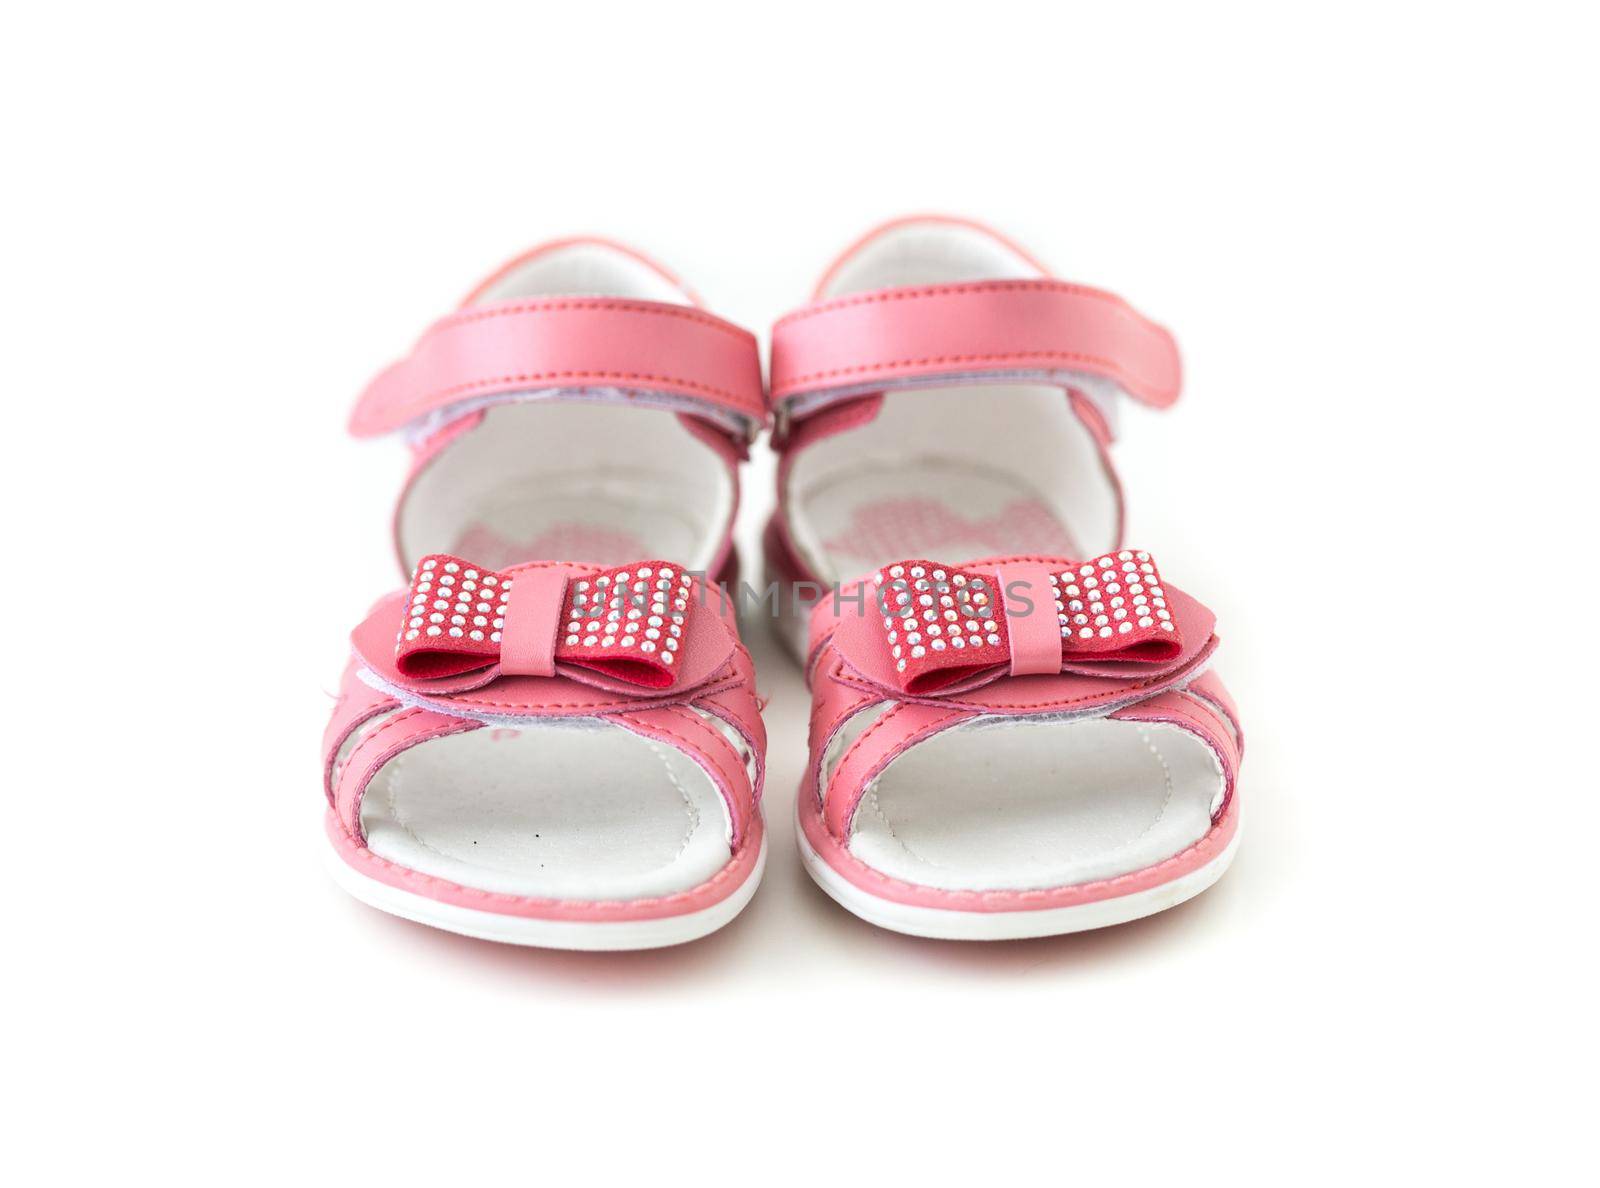 tiny pink sandals with bow isolated on white background